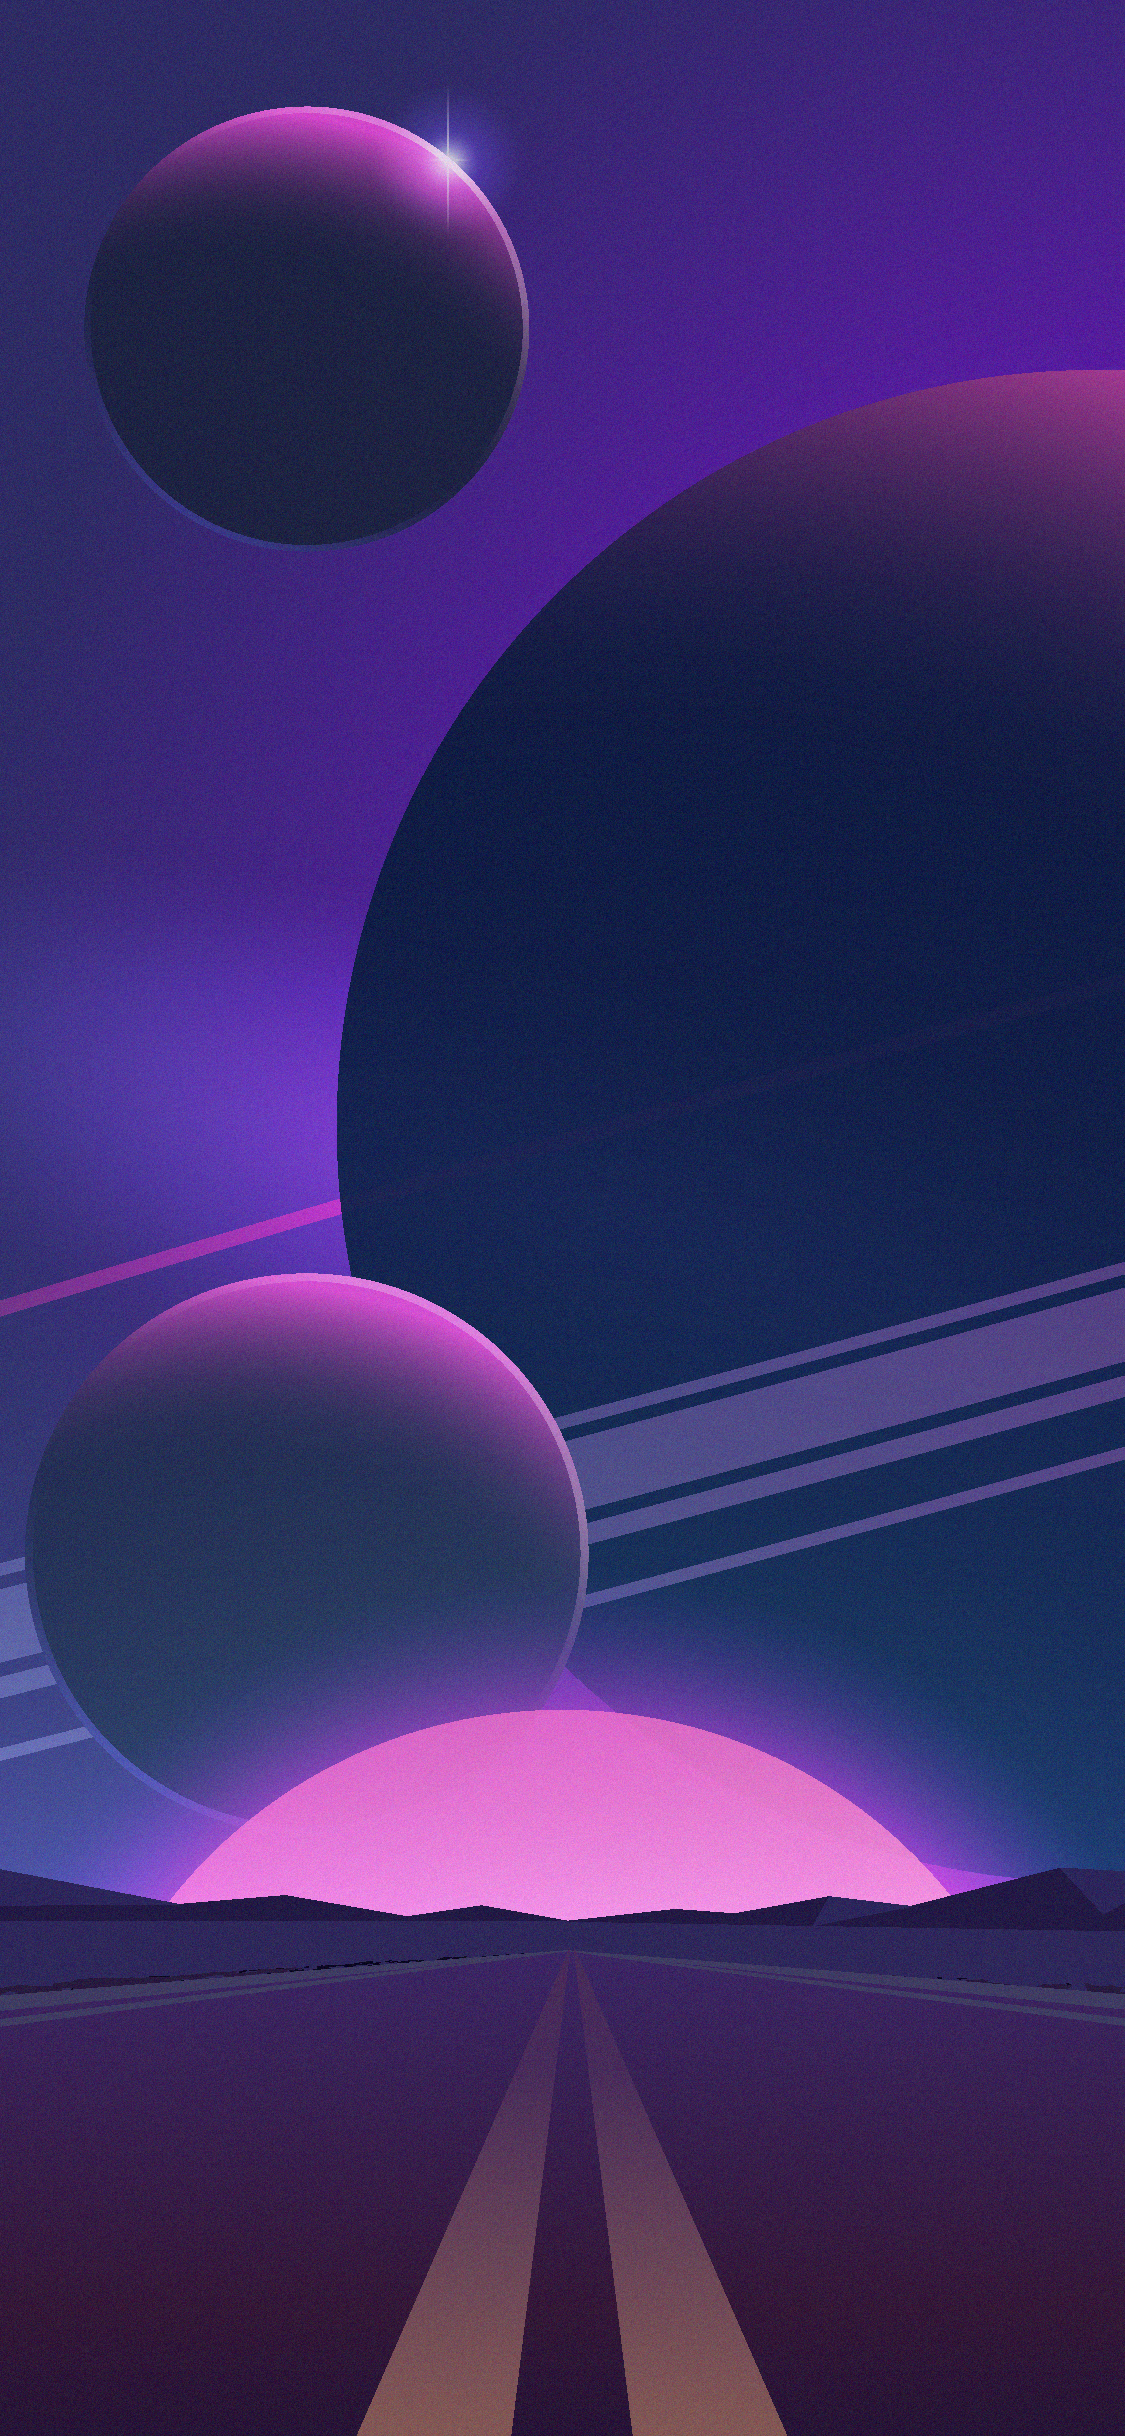 Wallpapers of purple planets